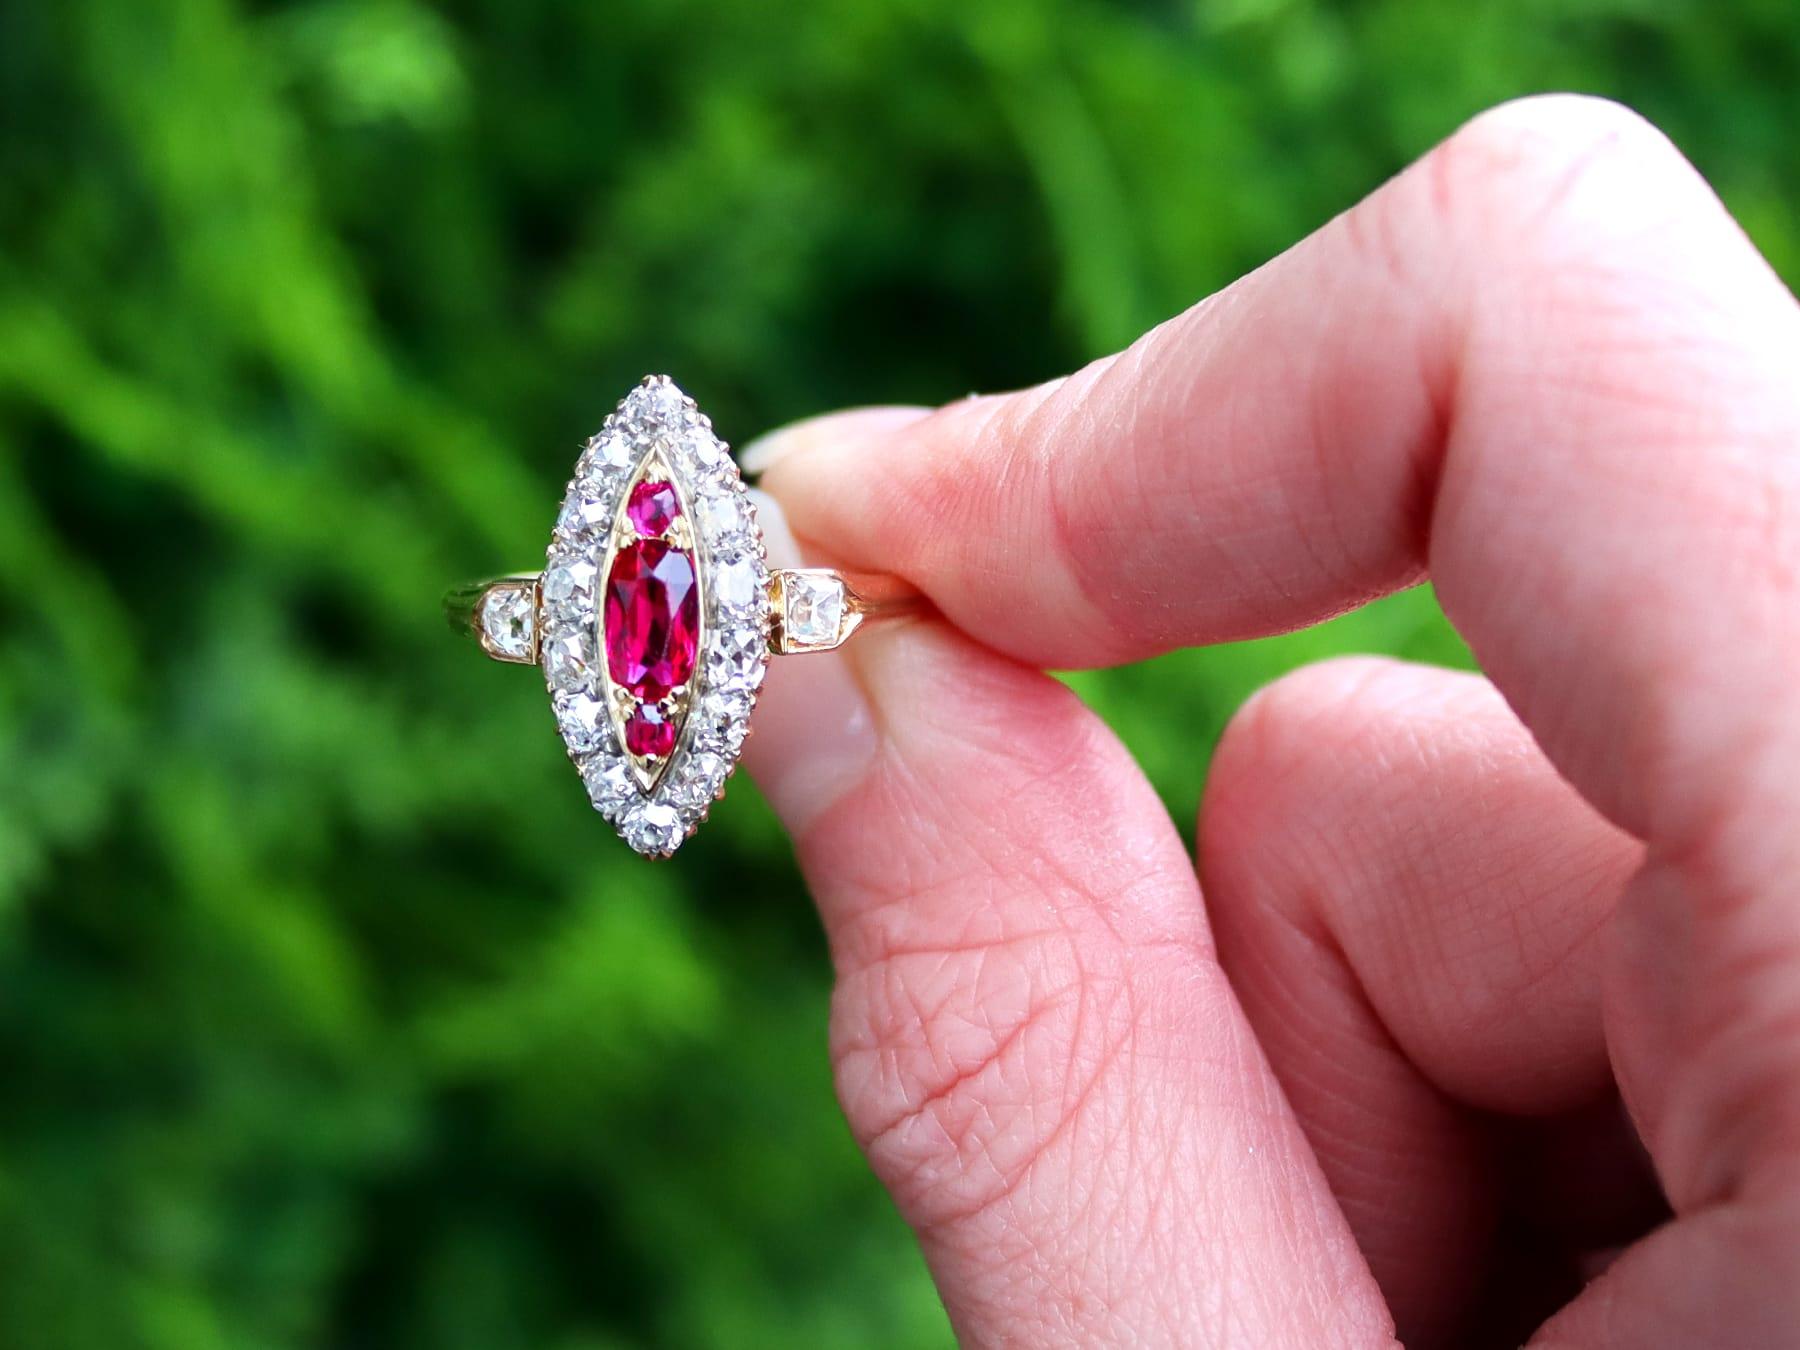 A stunning, fine and impressive antique 0.75ct Burmese ruby and 2.13 carat diamond, 18 karat yellow gold dress ring; part of our diverse antique jewellery and estate jewelry collections.

This stunning, fine and impressive antique ruby ring has been